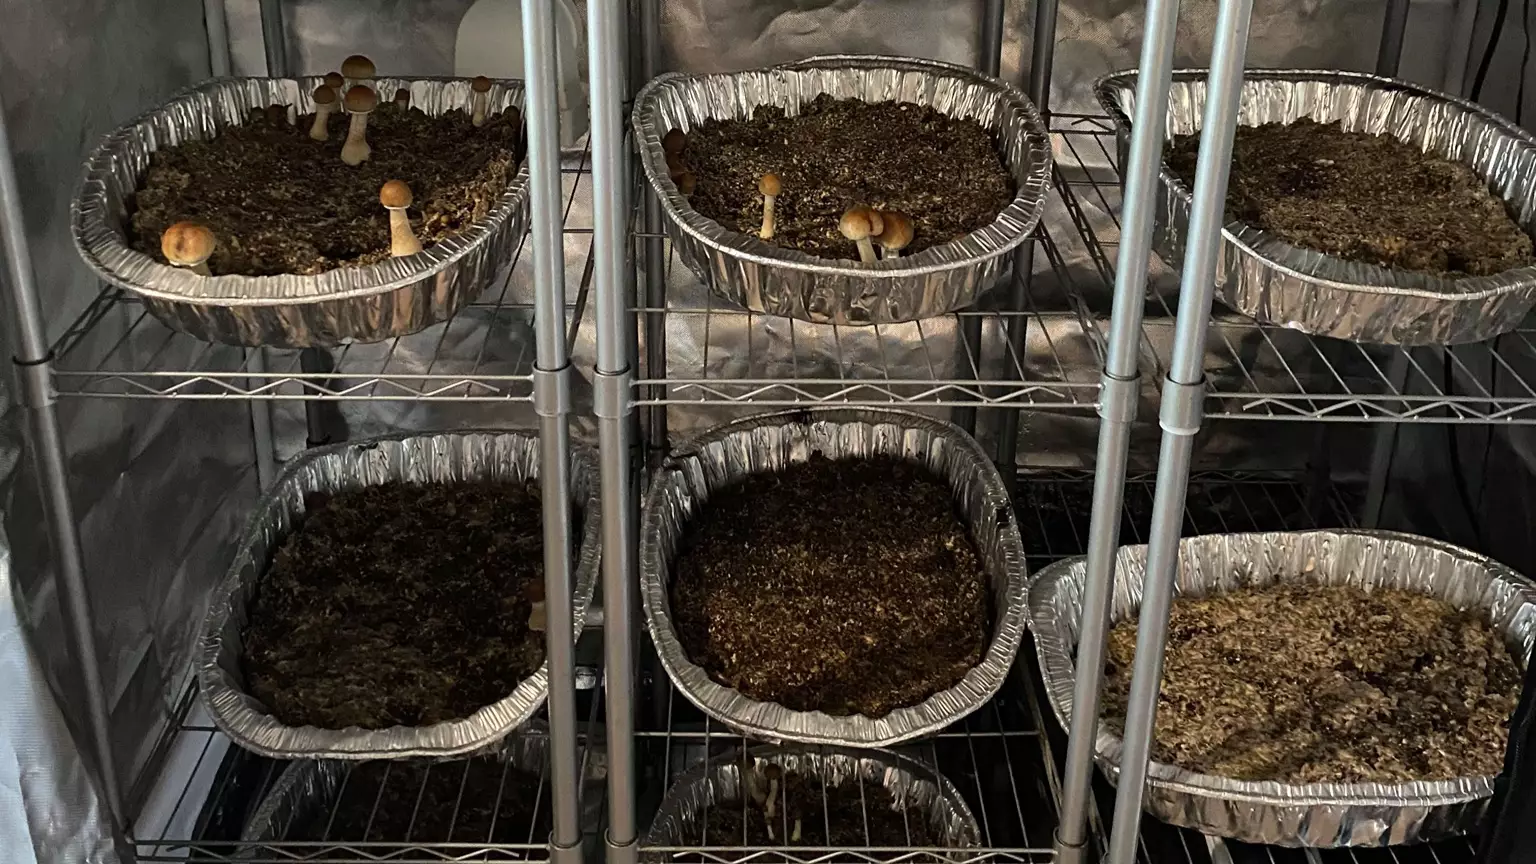 Police Bust First Magic Mushroom Factory Found In UK For More Than 20 Years